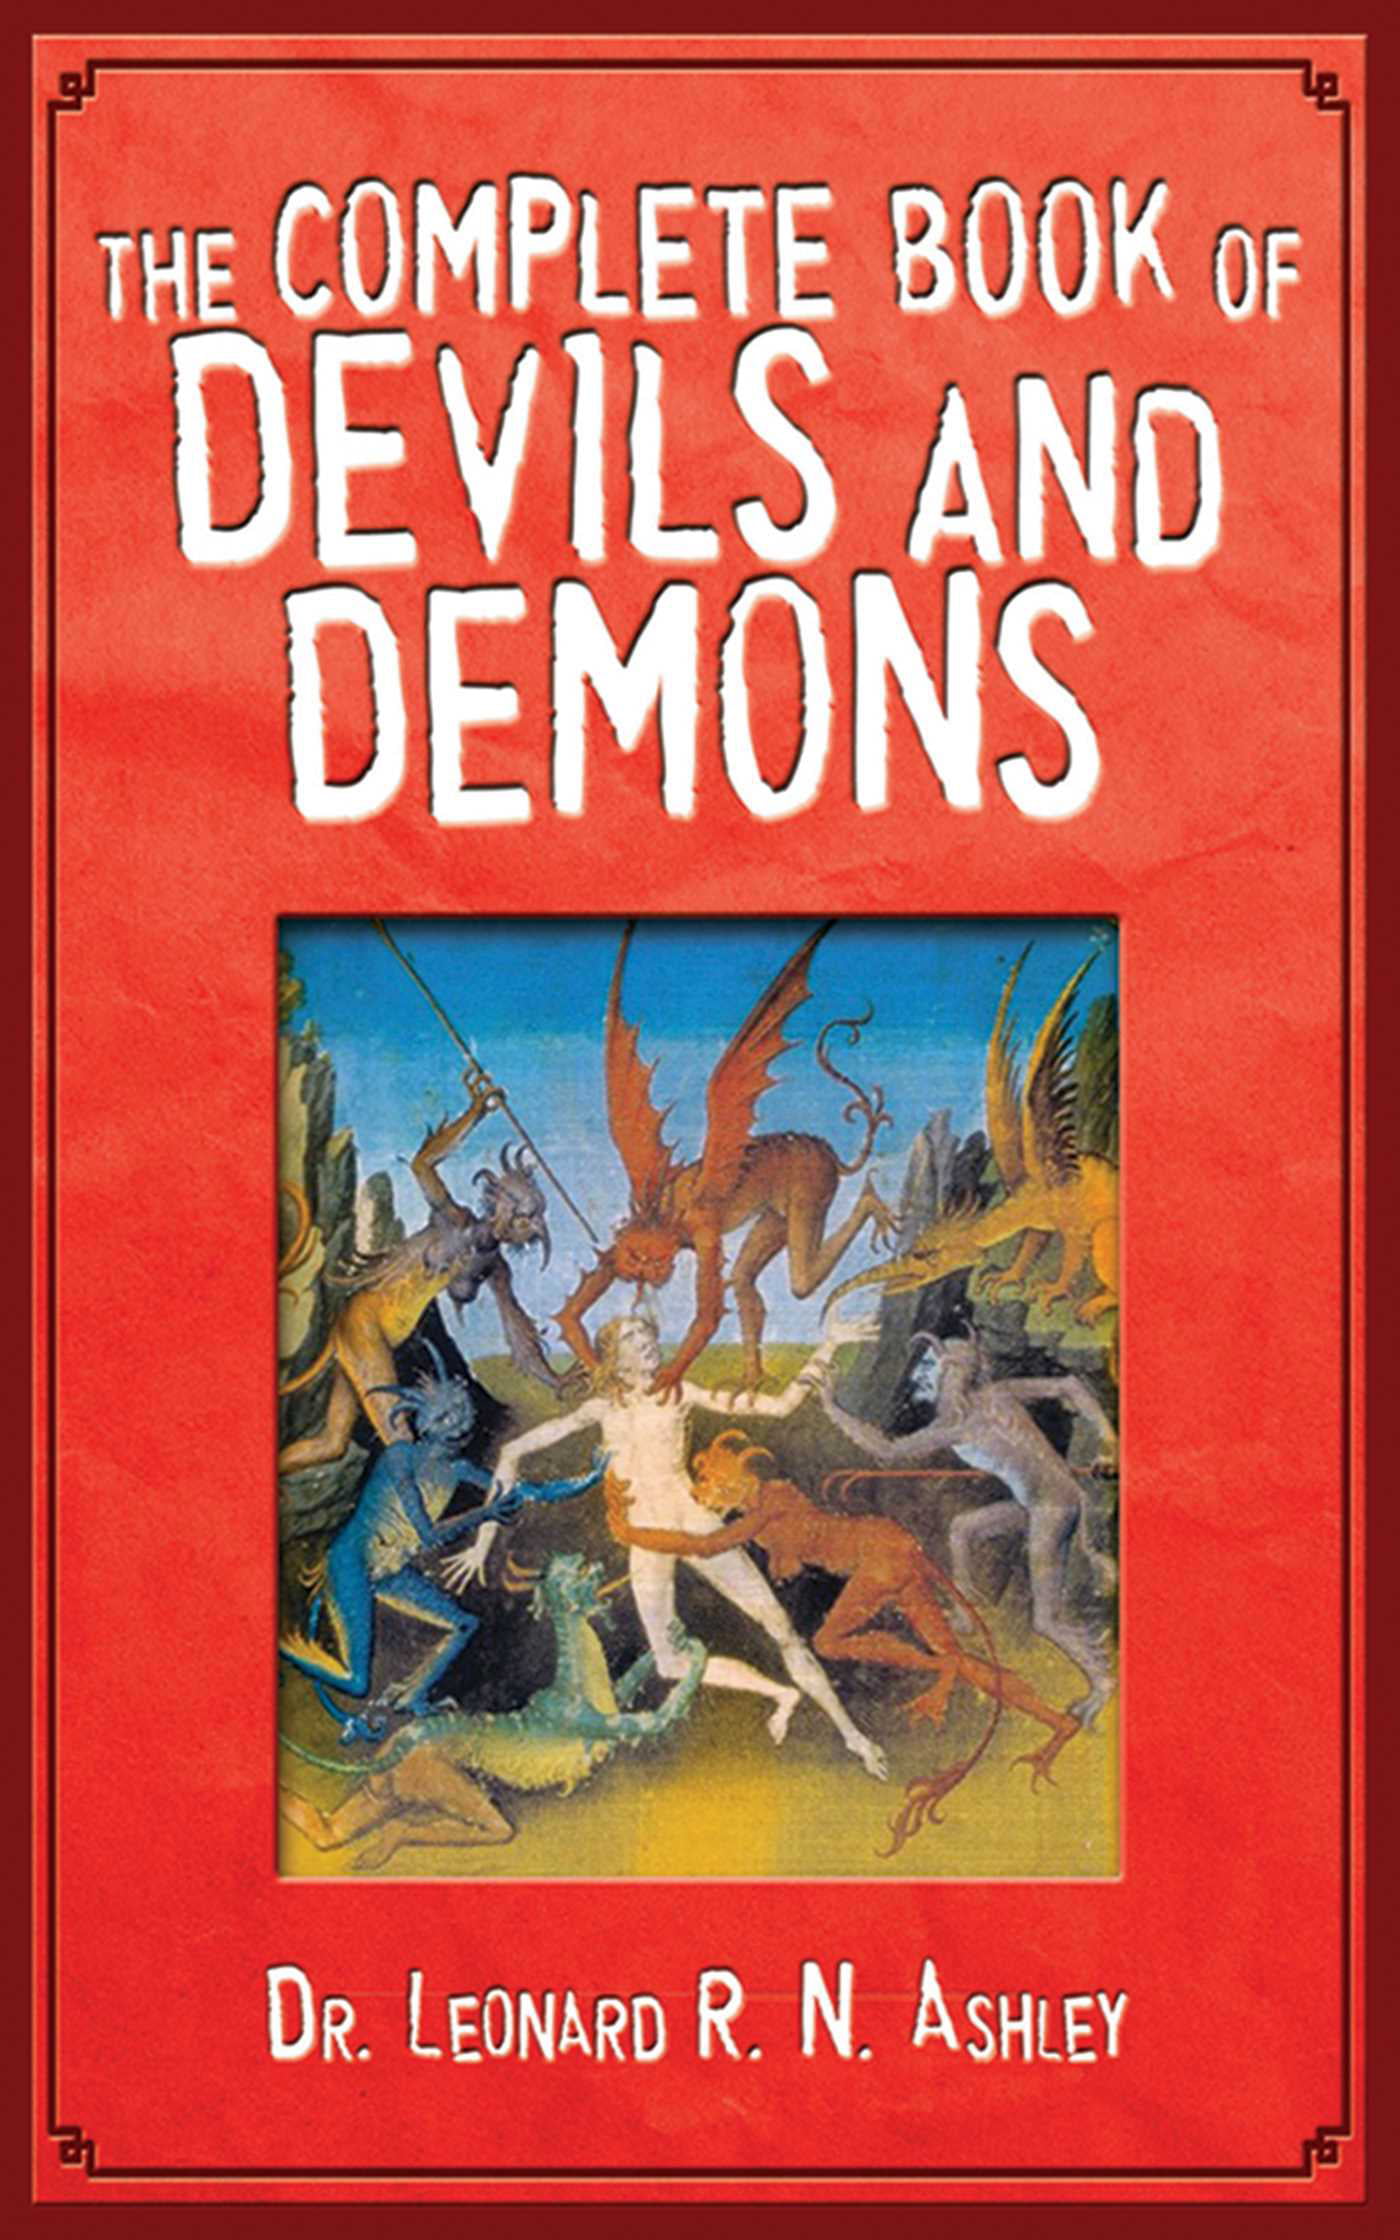 The Complete Book of Devils and Demons (Paperback) - Walmart.com ...